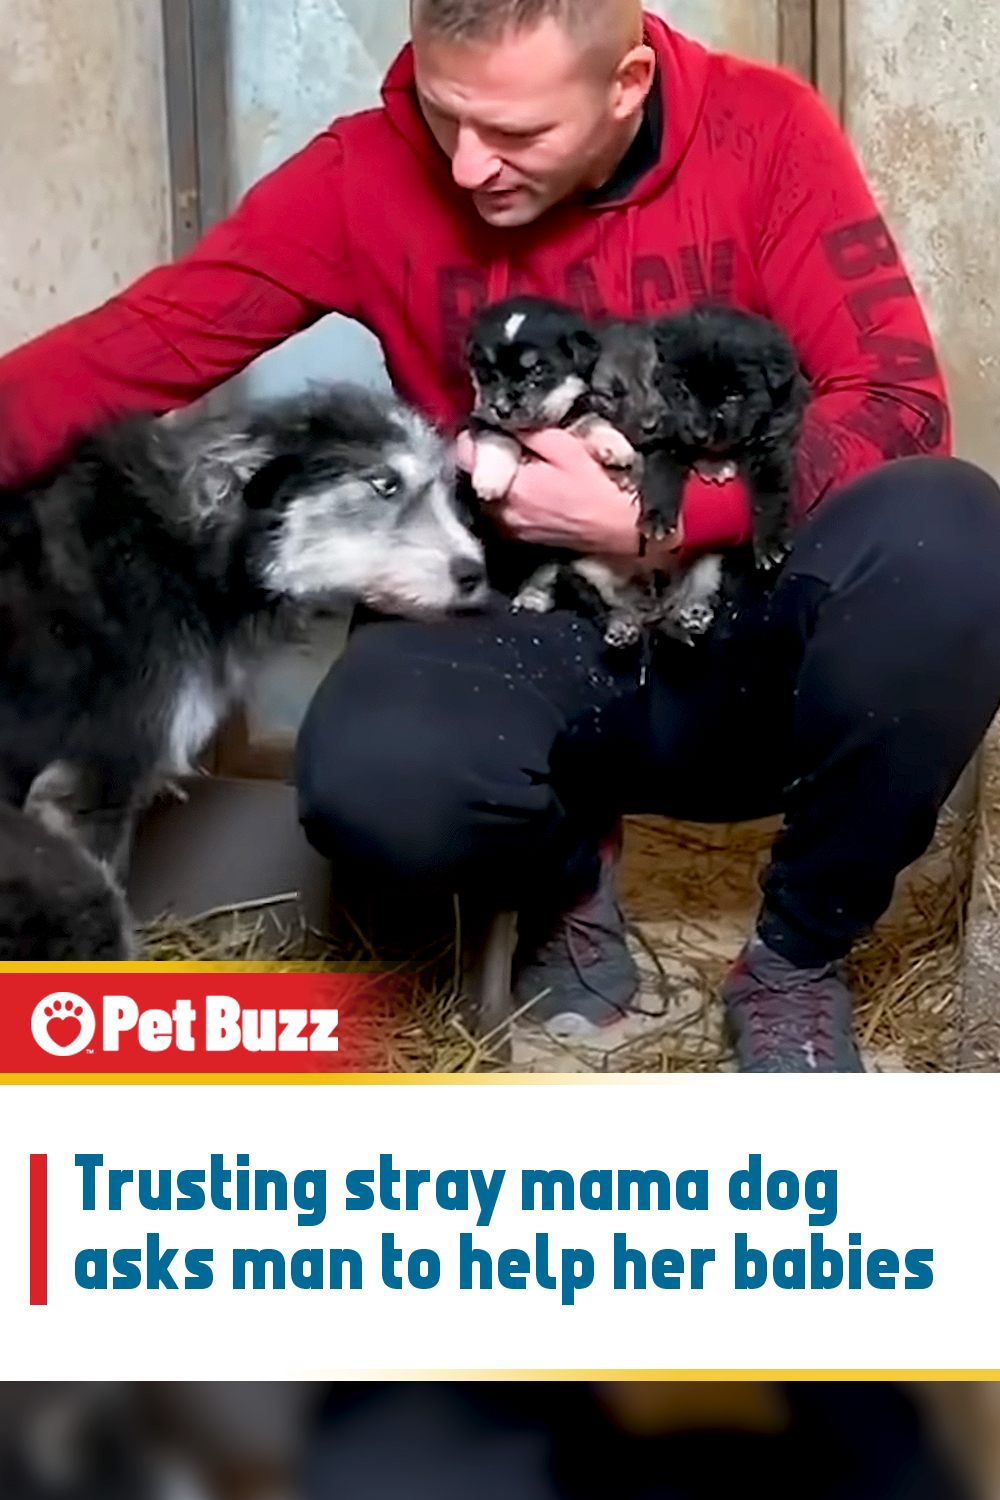 Trusting stray mama dog asks man to help her babies